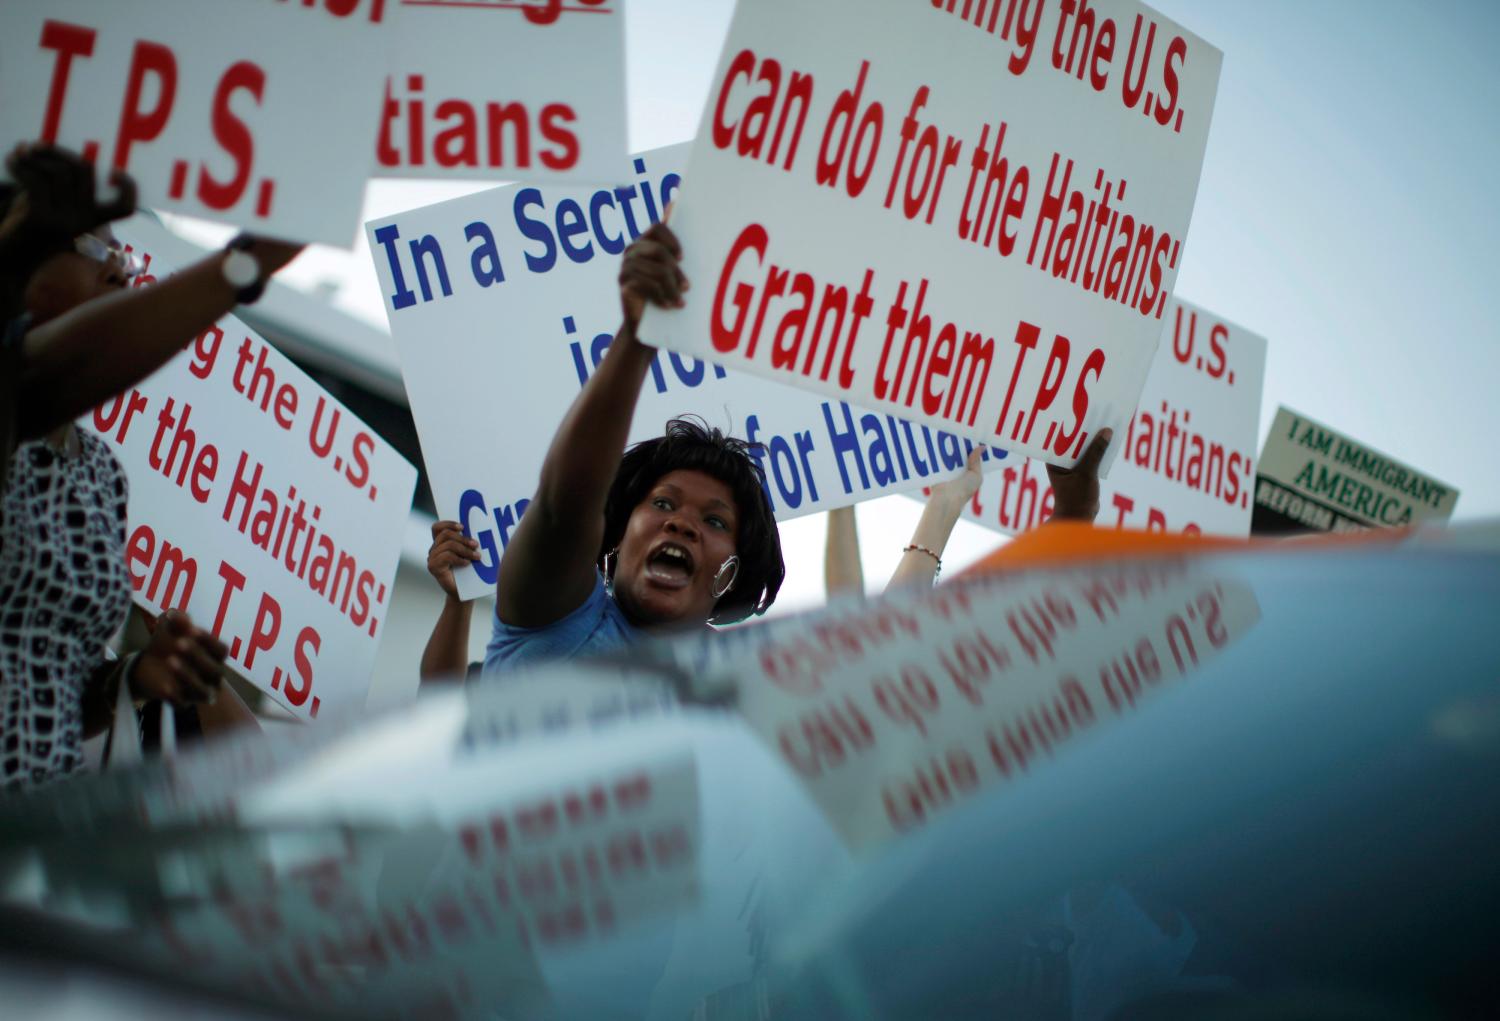 Protesters hold up signs in favor of granting Haitian refugees TPS.